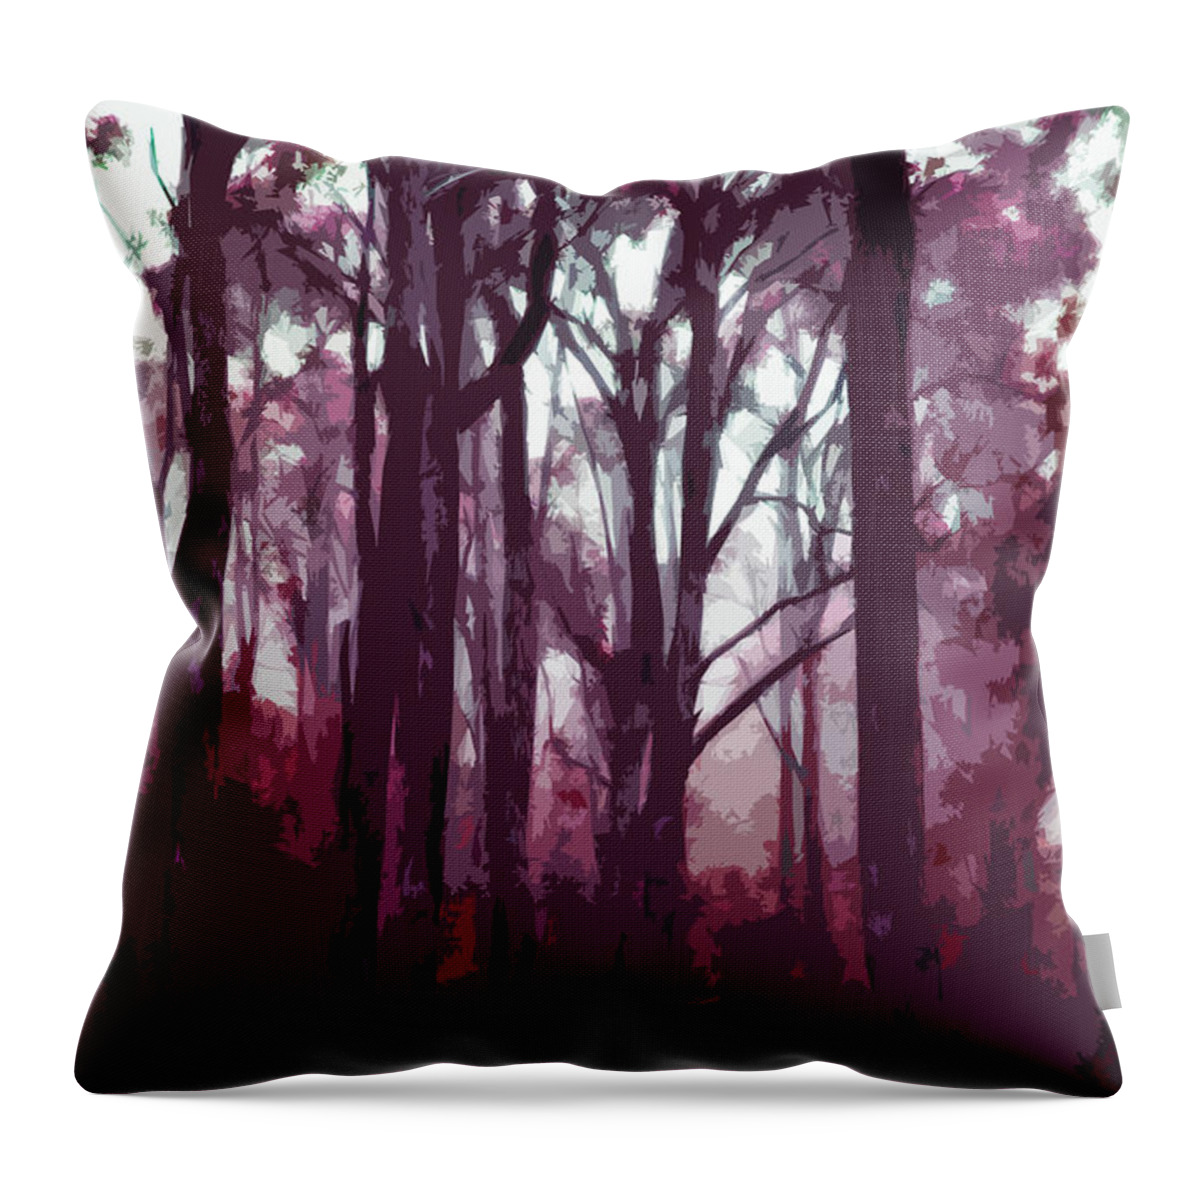 Landscapes Throw Pillow featuring the digital art Forest of trees in winter twilight by Phill Petrovic